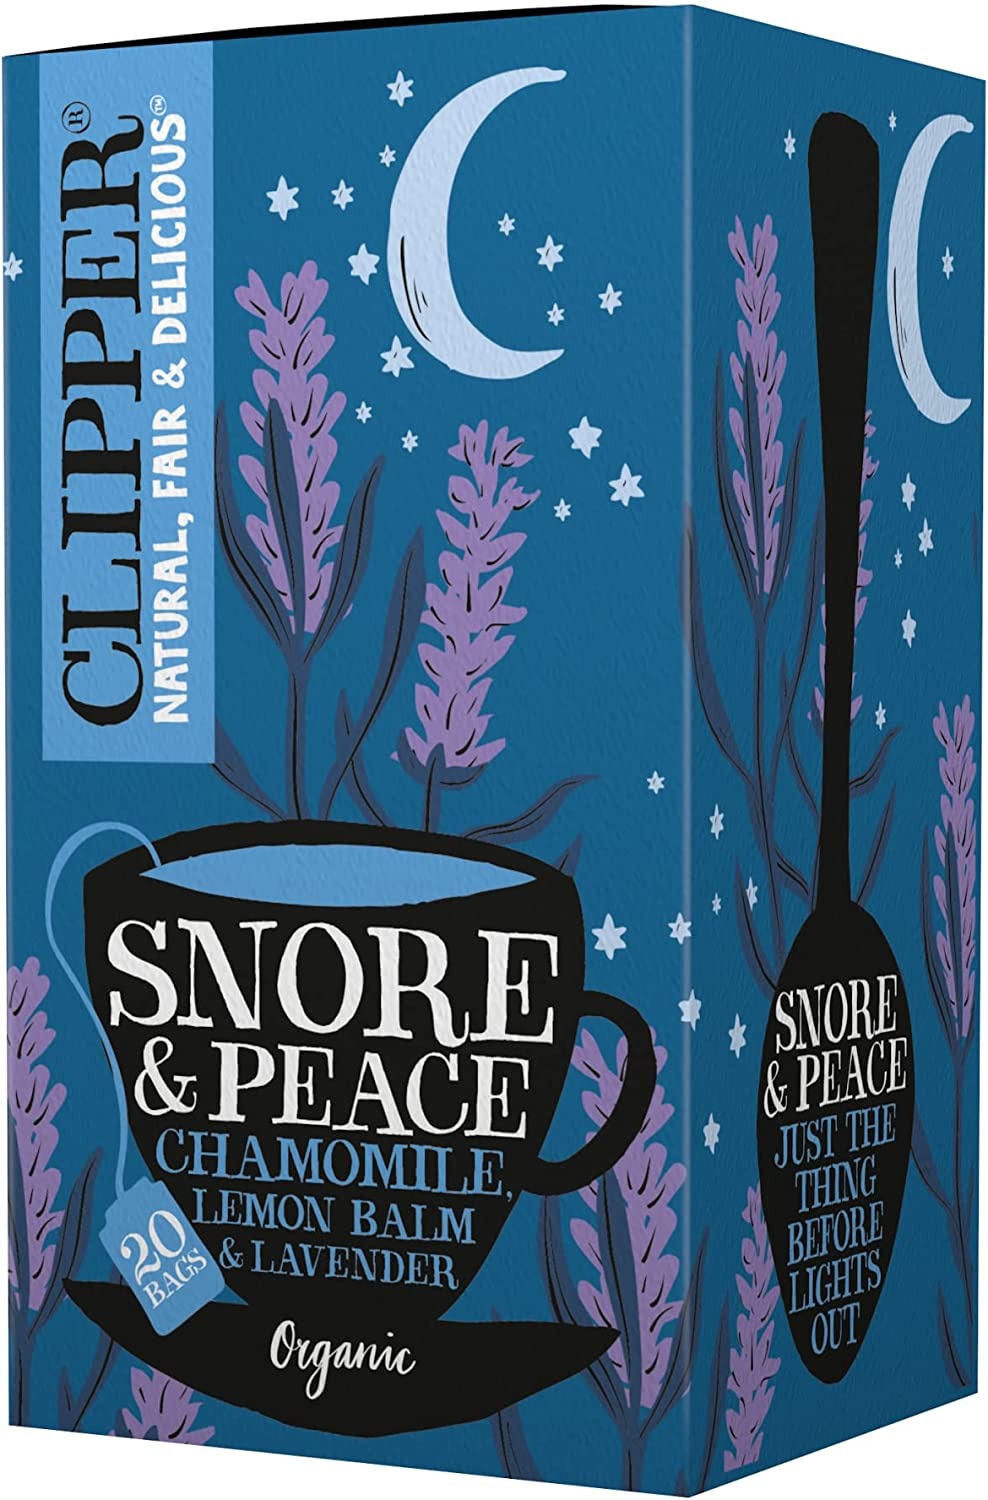 Clipper Organic Snore & Peace Infusion Tea - 20 Unbleached Bags - 30g (Pack  of 2)